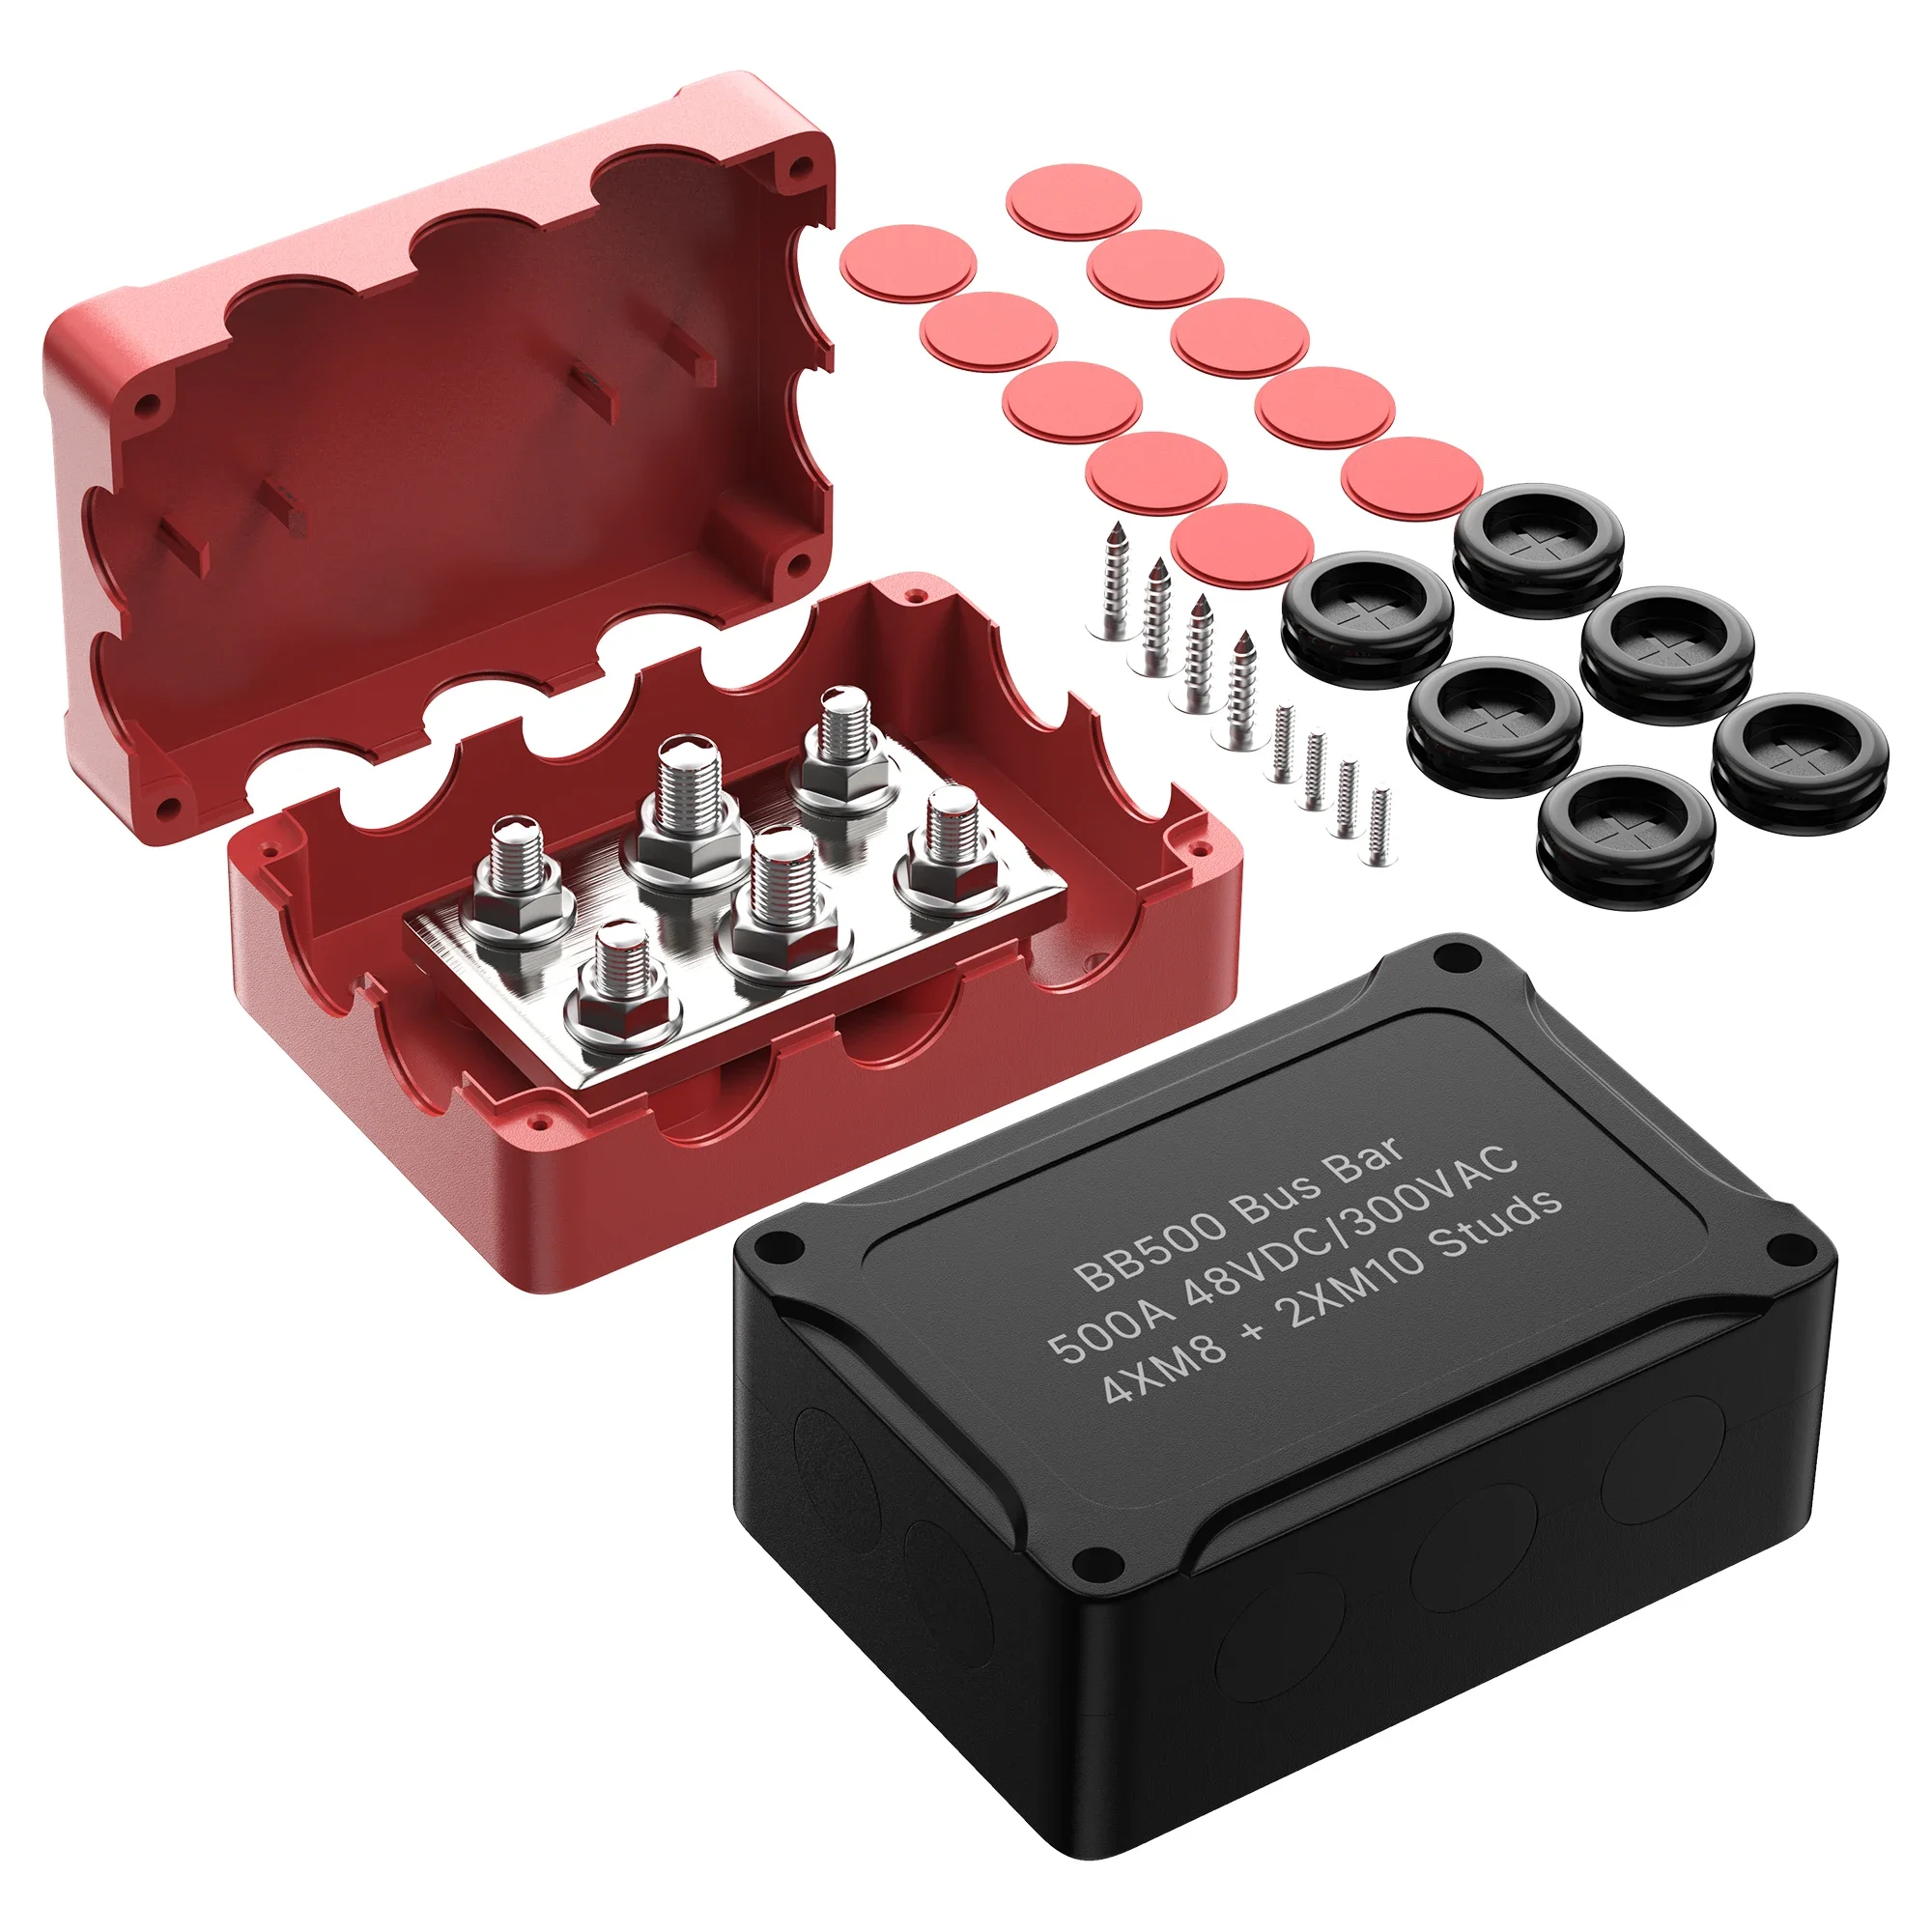 

500A 48V Big Current Terminal Block Copper Black/Red Marine Busbar 6 Studs Screw Terminal Block Connector With Rubber Gasket